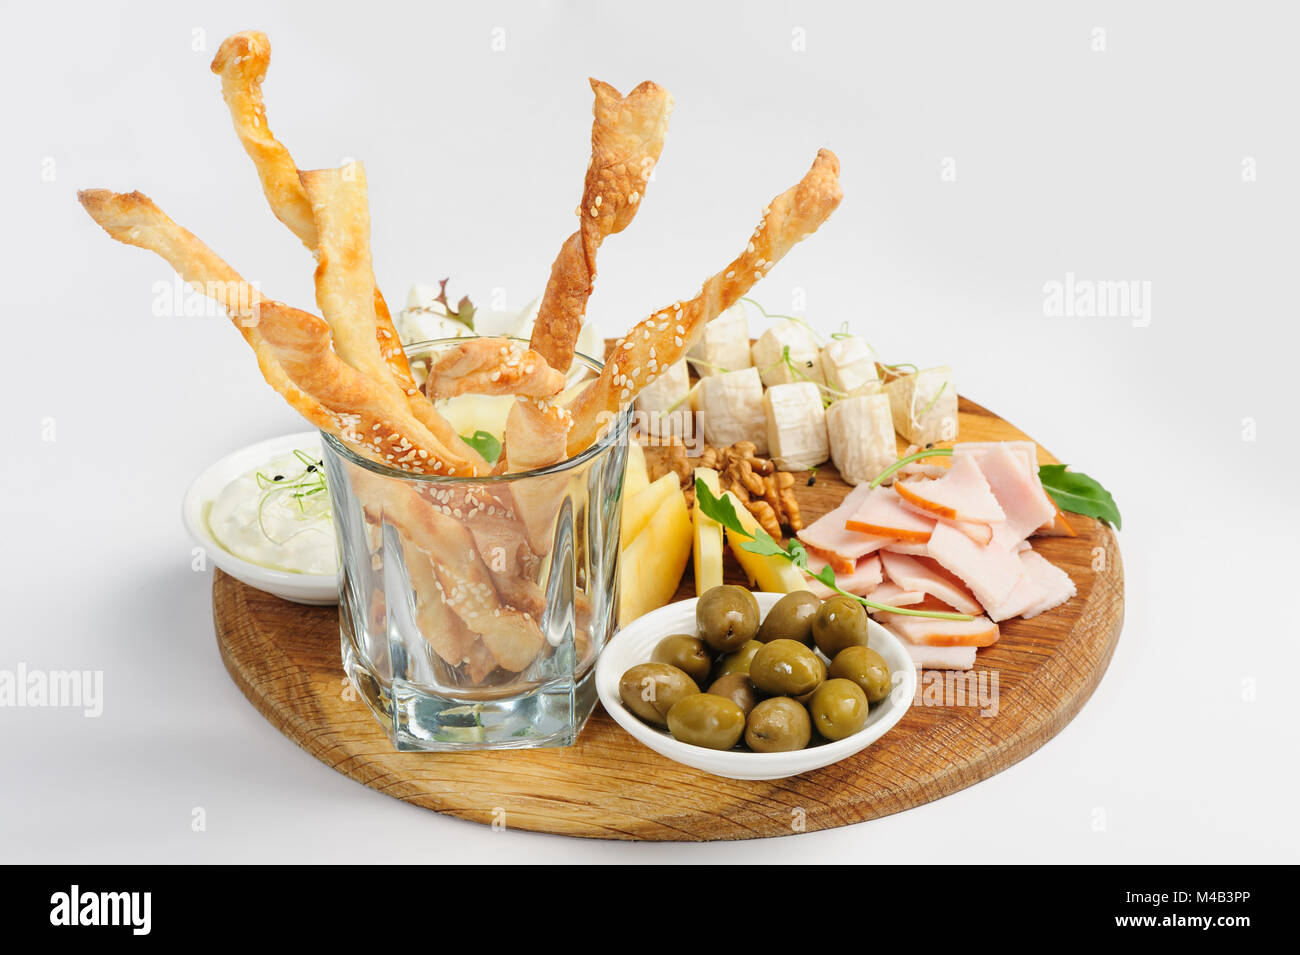 Assorted beer snack, cheeses, wallnuts and other Stock Photo